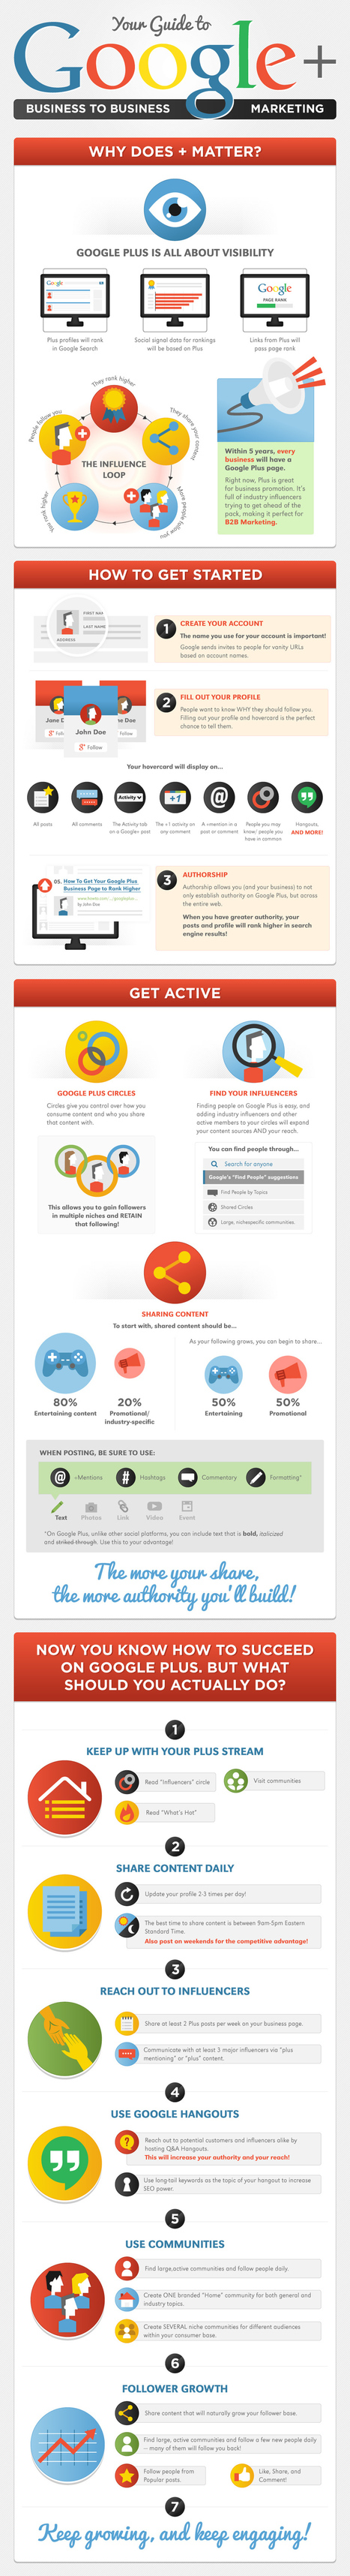 The Complete Guide to Google+ for B2B Marketing [Infographic] | e-commerce & social media | Scoop.it